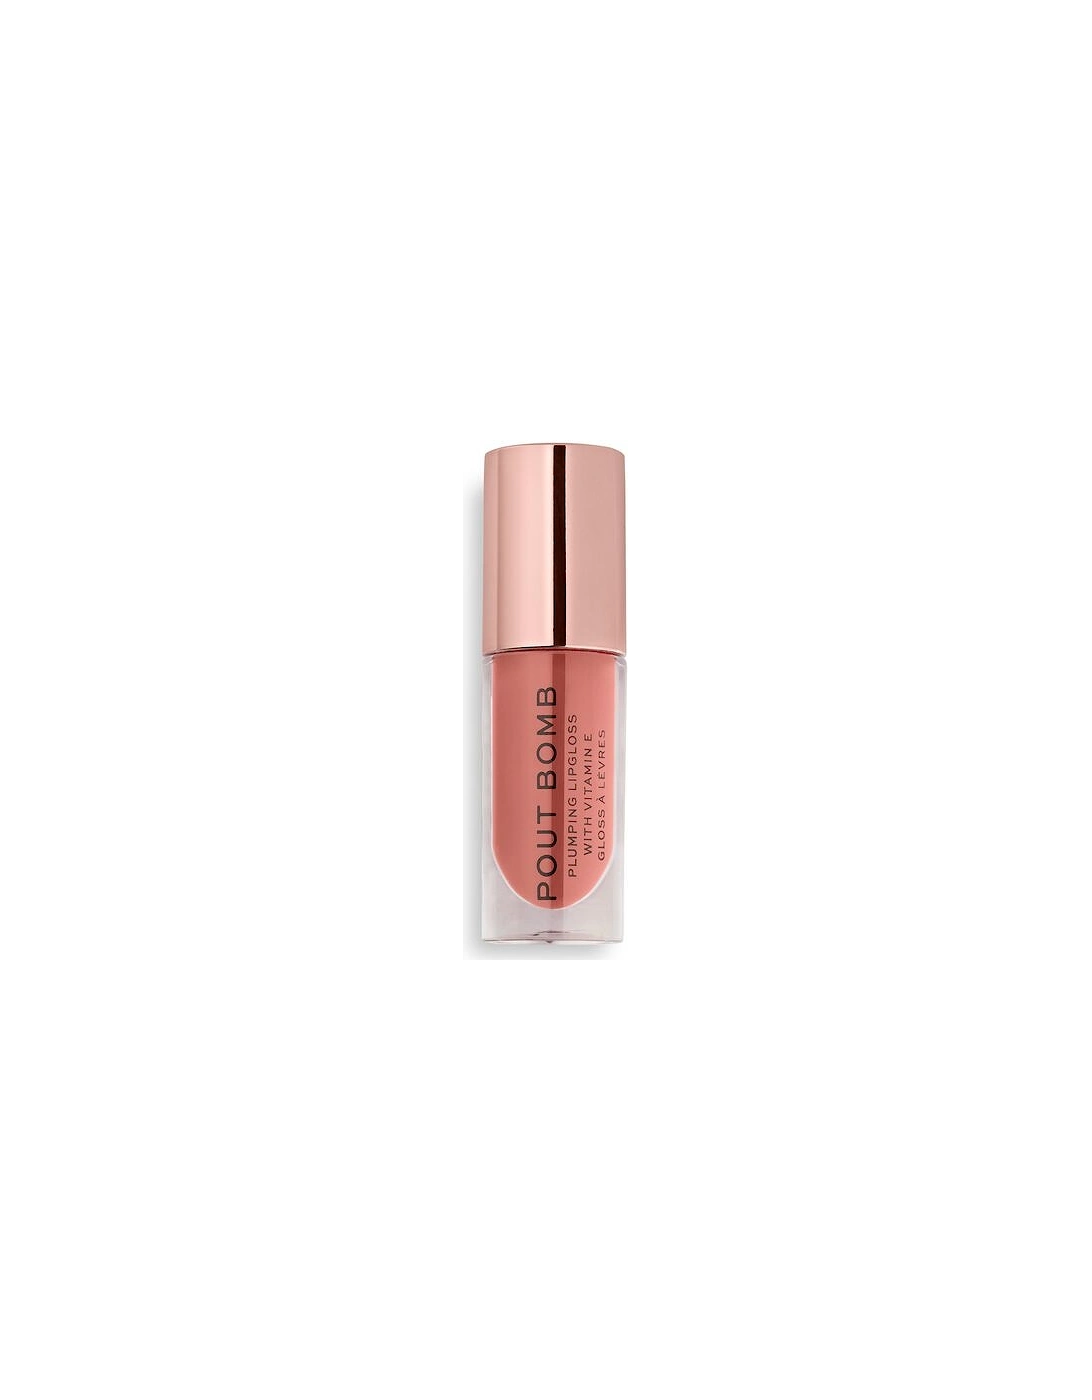 Pout Bomb Plumping Gloss Kiss Nude, 2 of 1